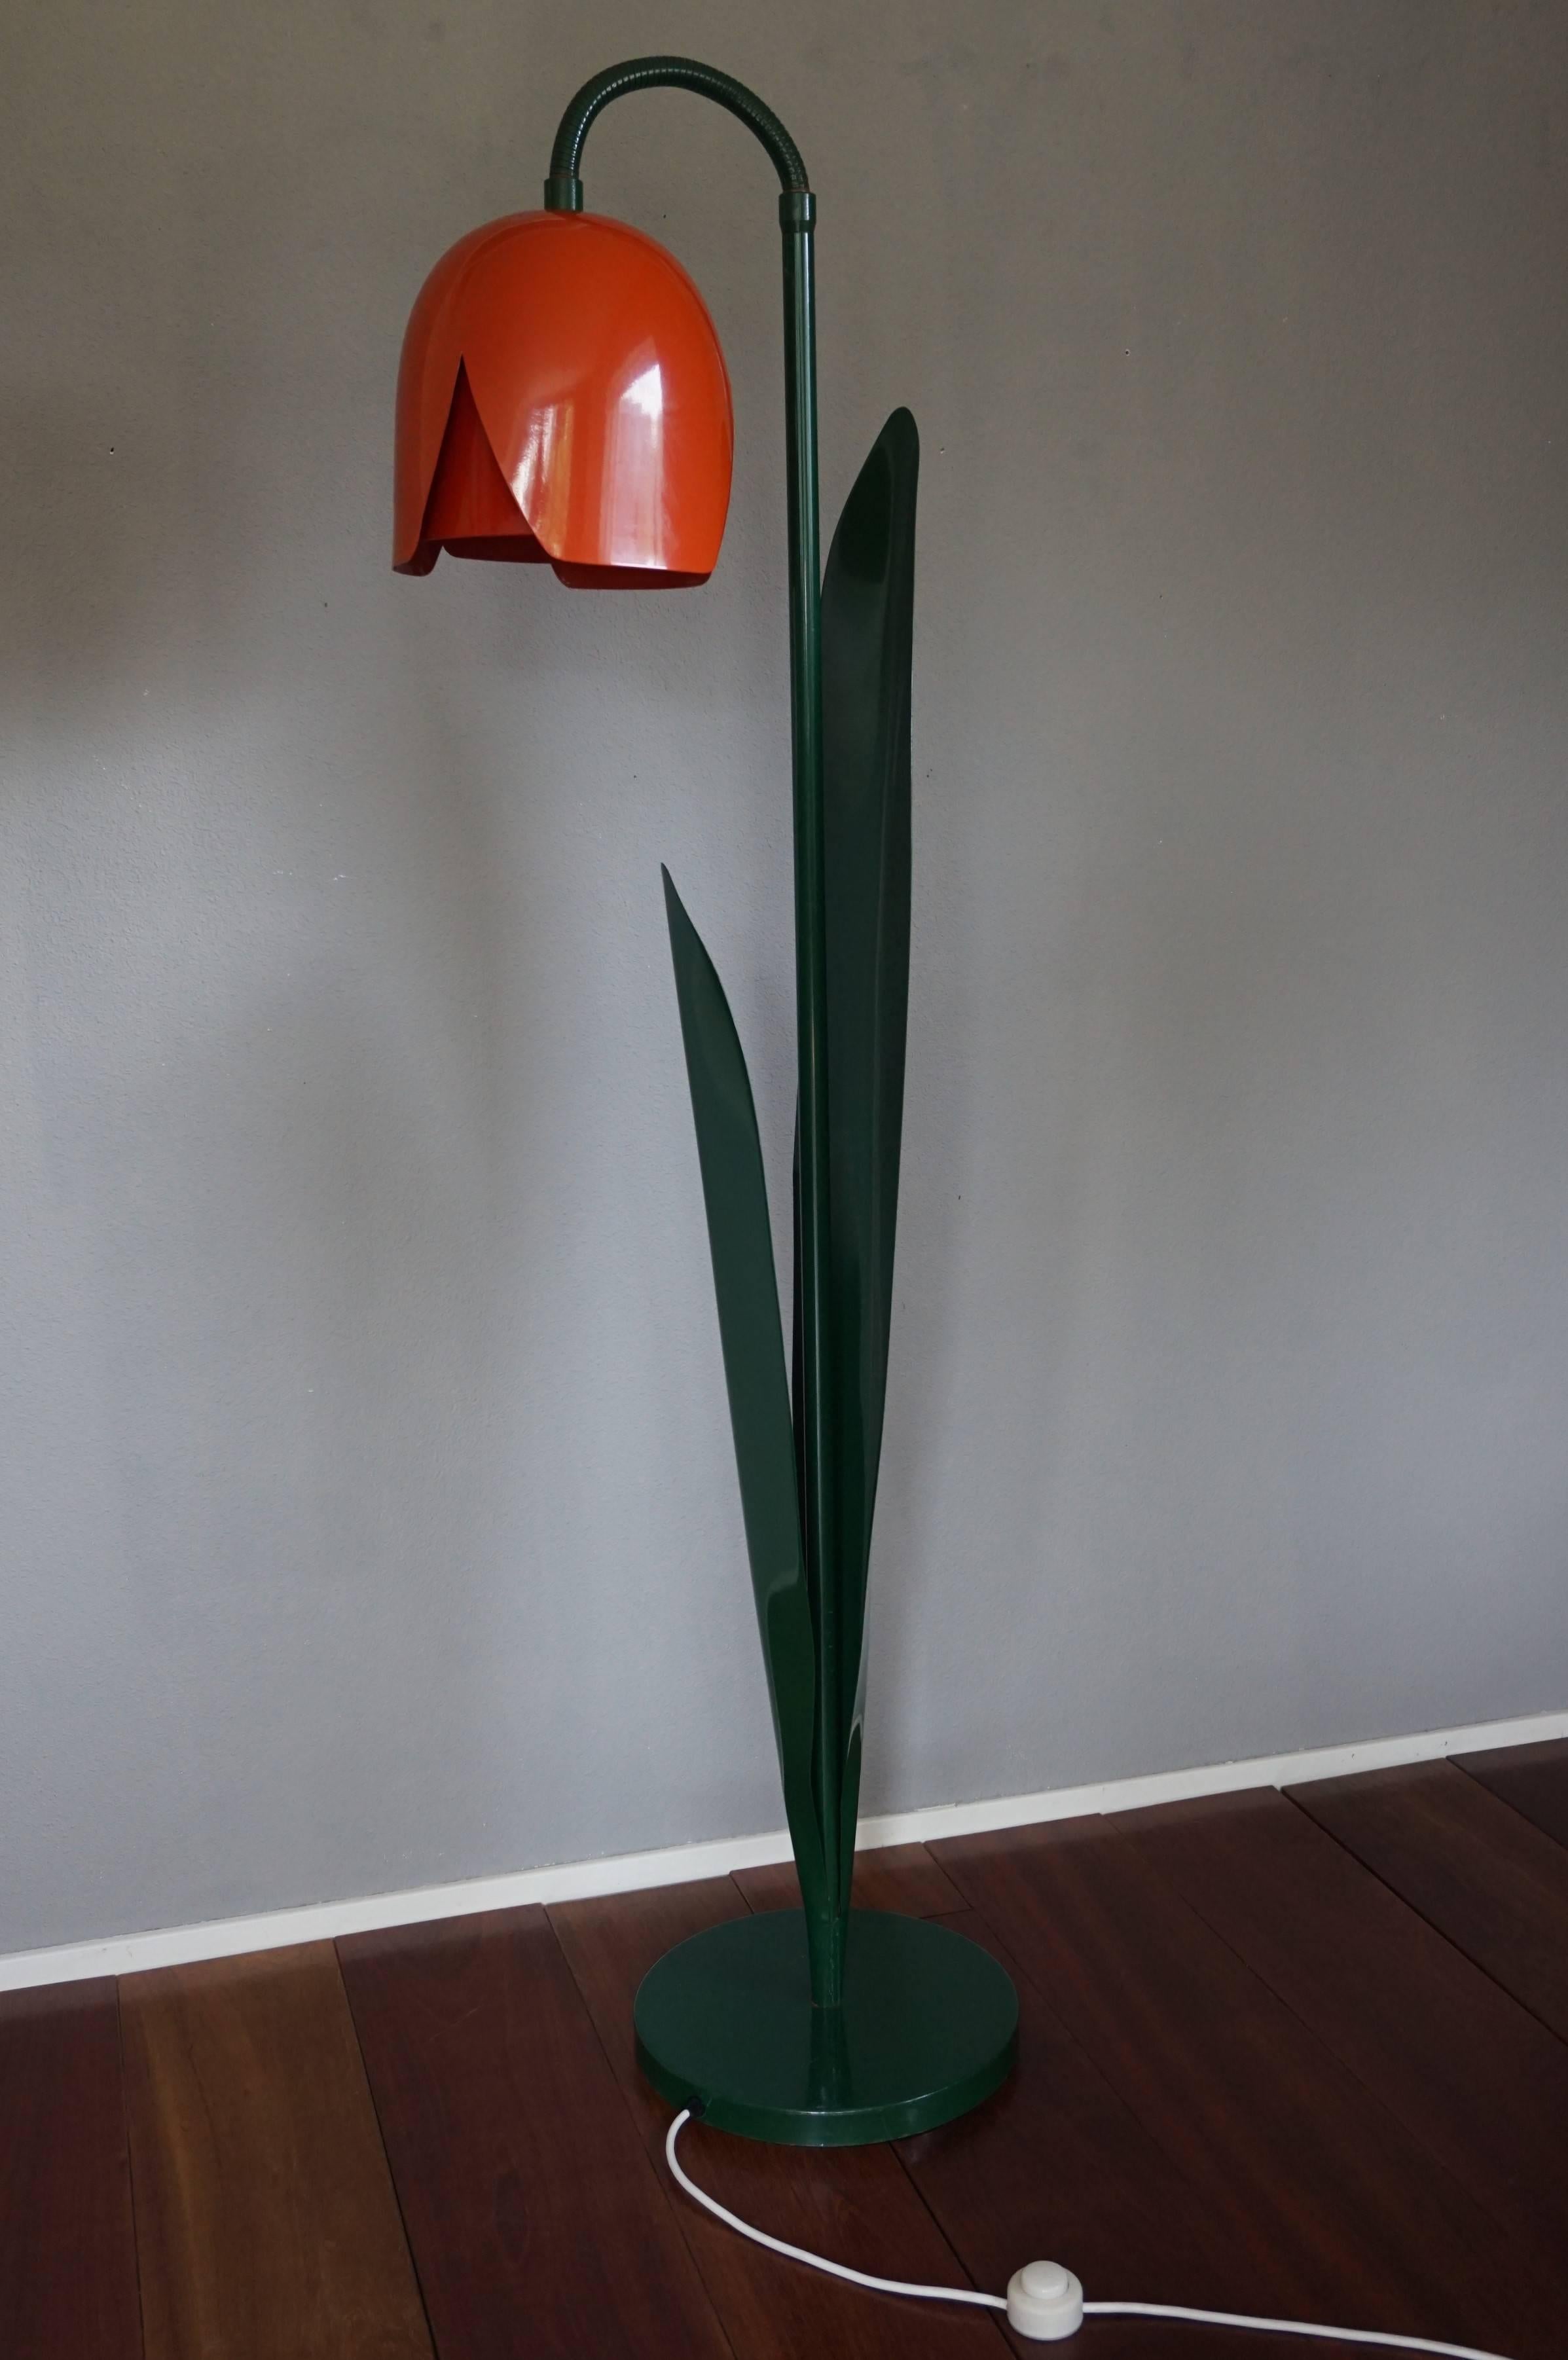 Very cool British Pop Art floor lamp.

For the collectors and enthousiasts of pop art, we are offering this very rare and stylized tulip design floor lamp. It is entirely made of painted metal and the colors make it extra vibrant and modern. The